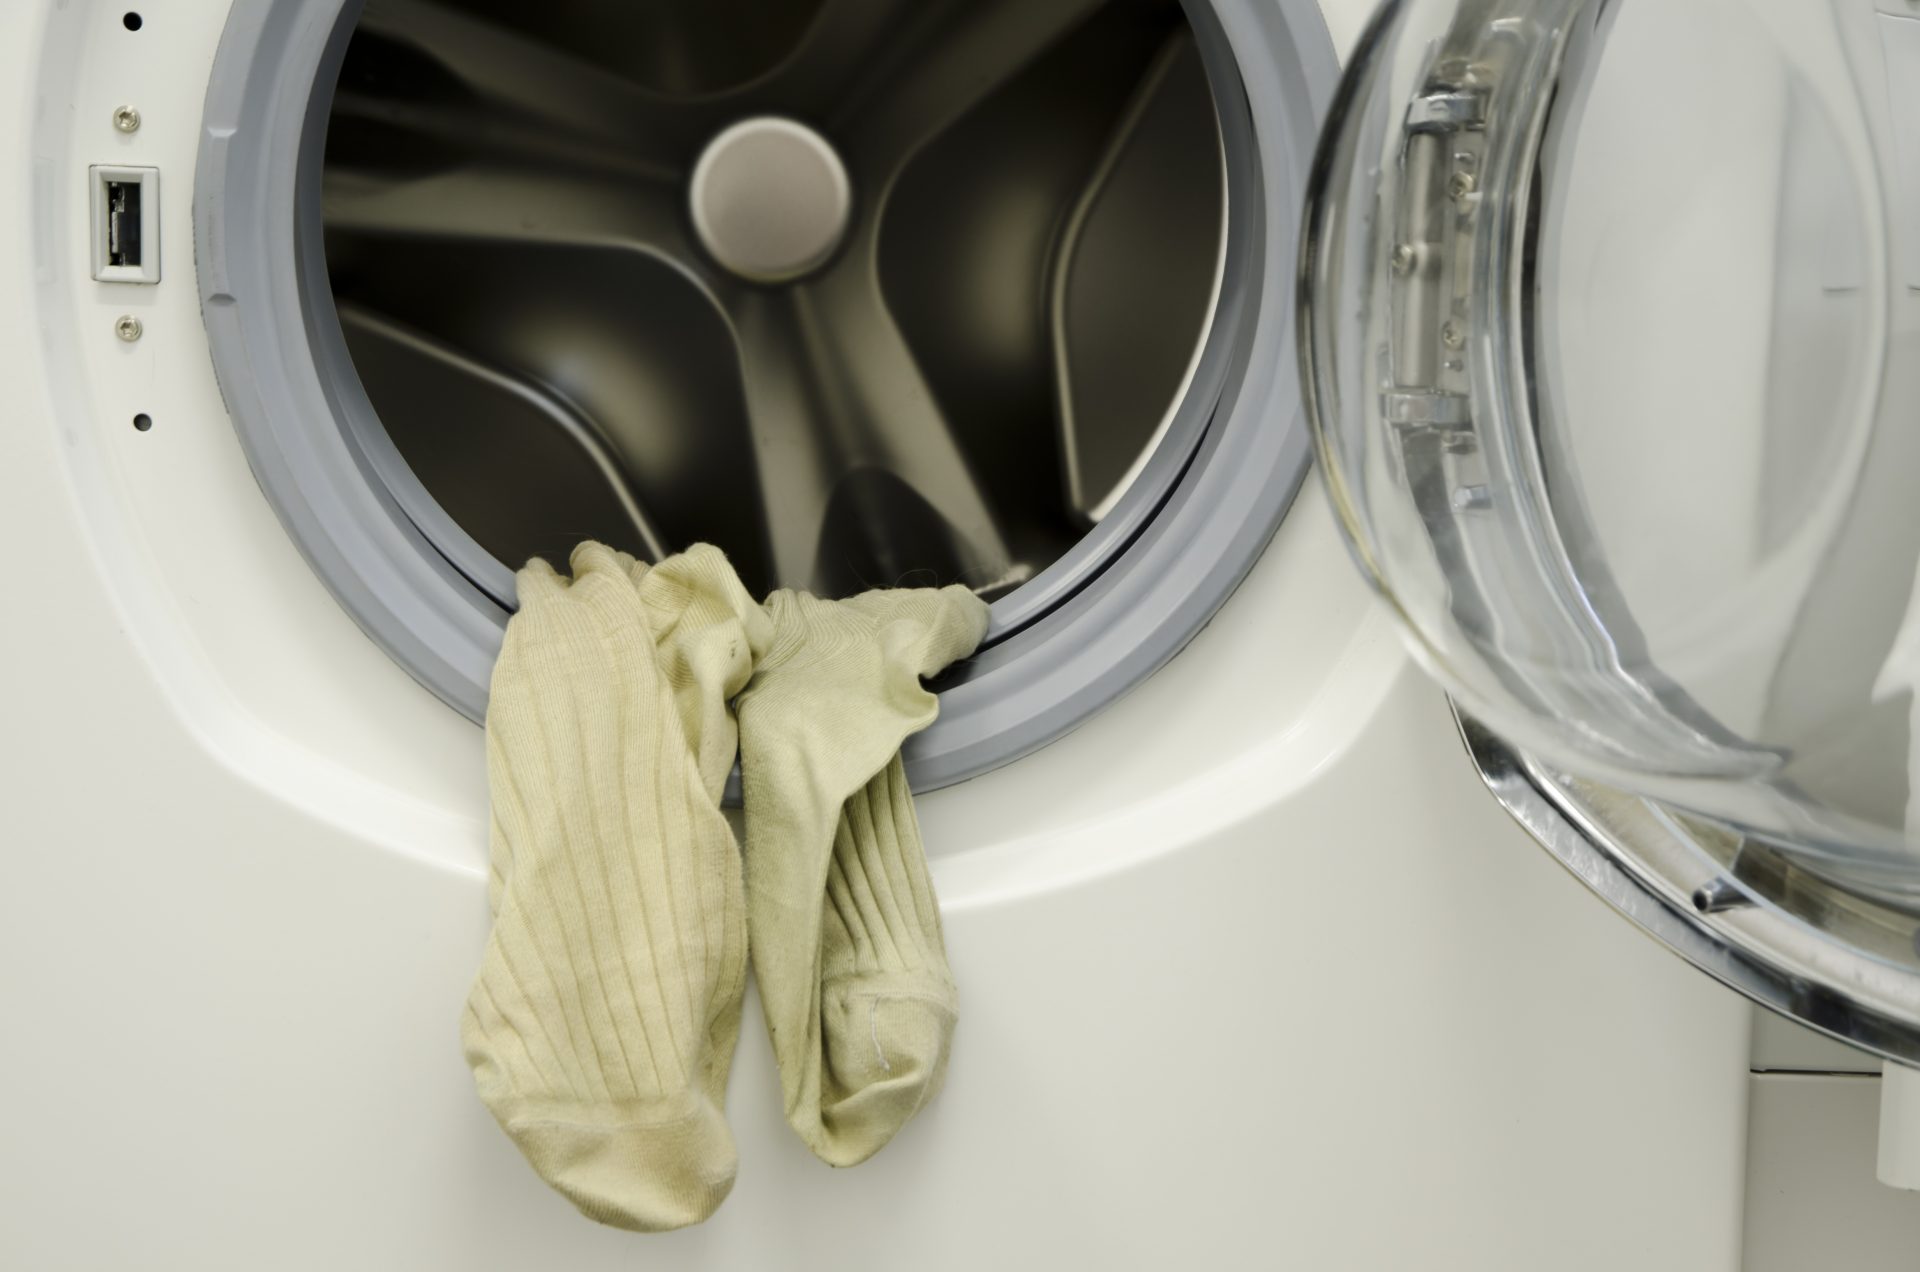 closeup-shot-of-the-dirty-laundry-hanging-from-the-washing-machine-1